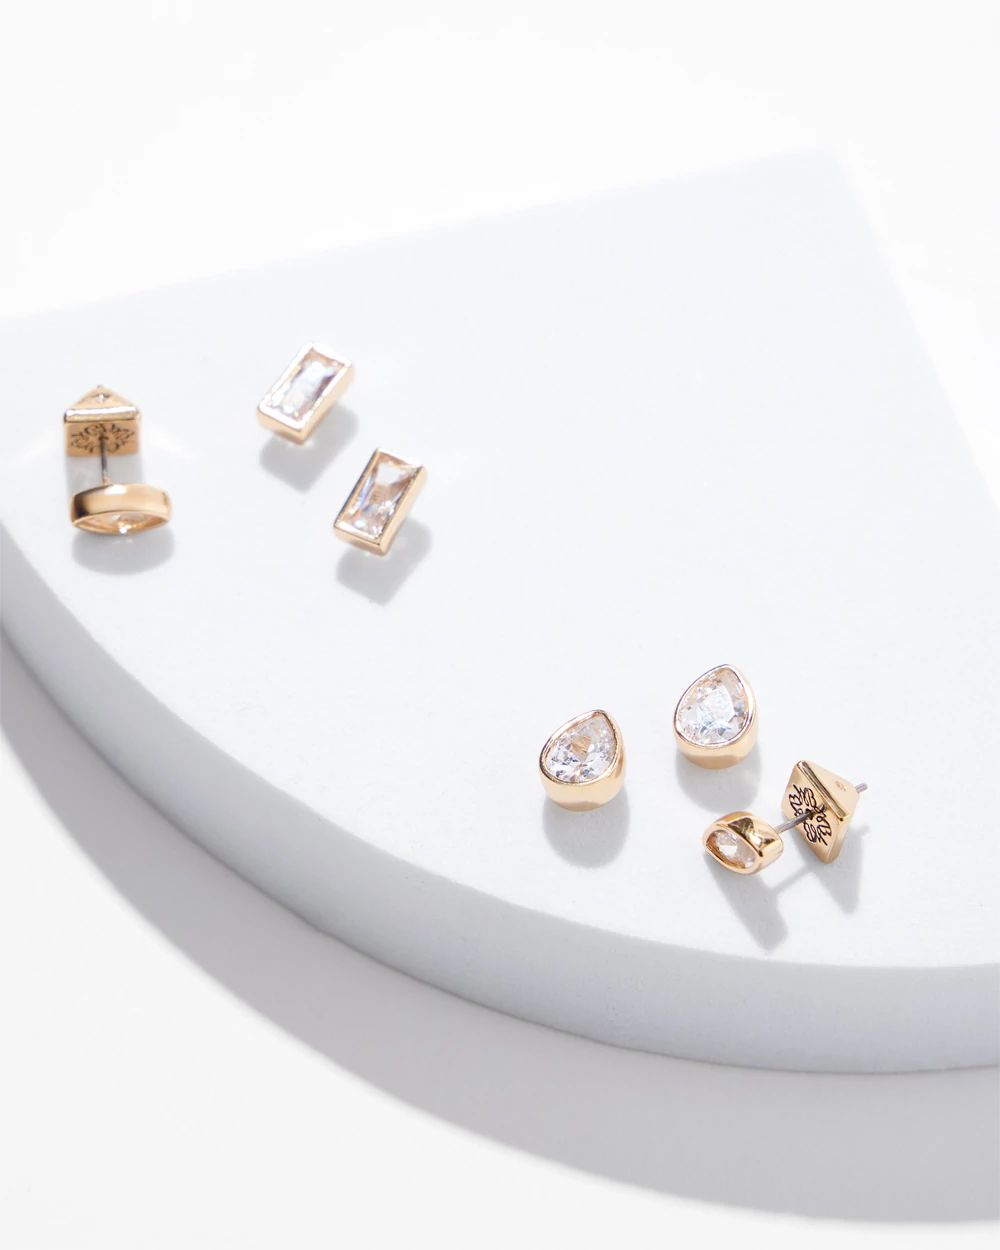 Gold Cubic Zirconia Bezel Stud Trio Earring click to view larger image.